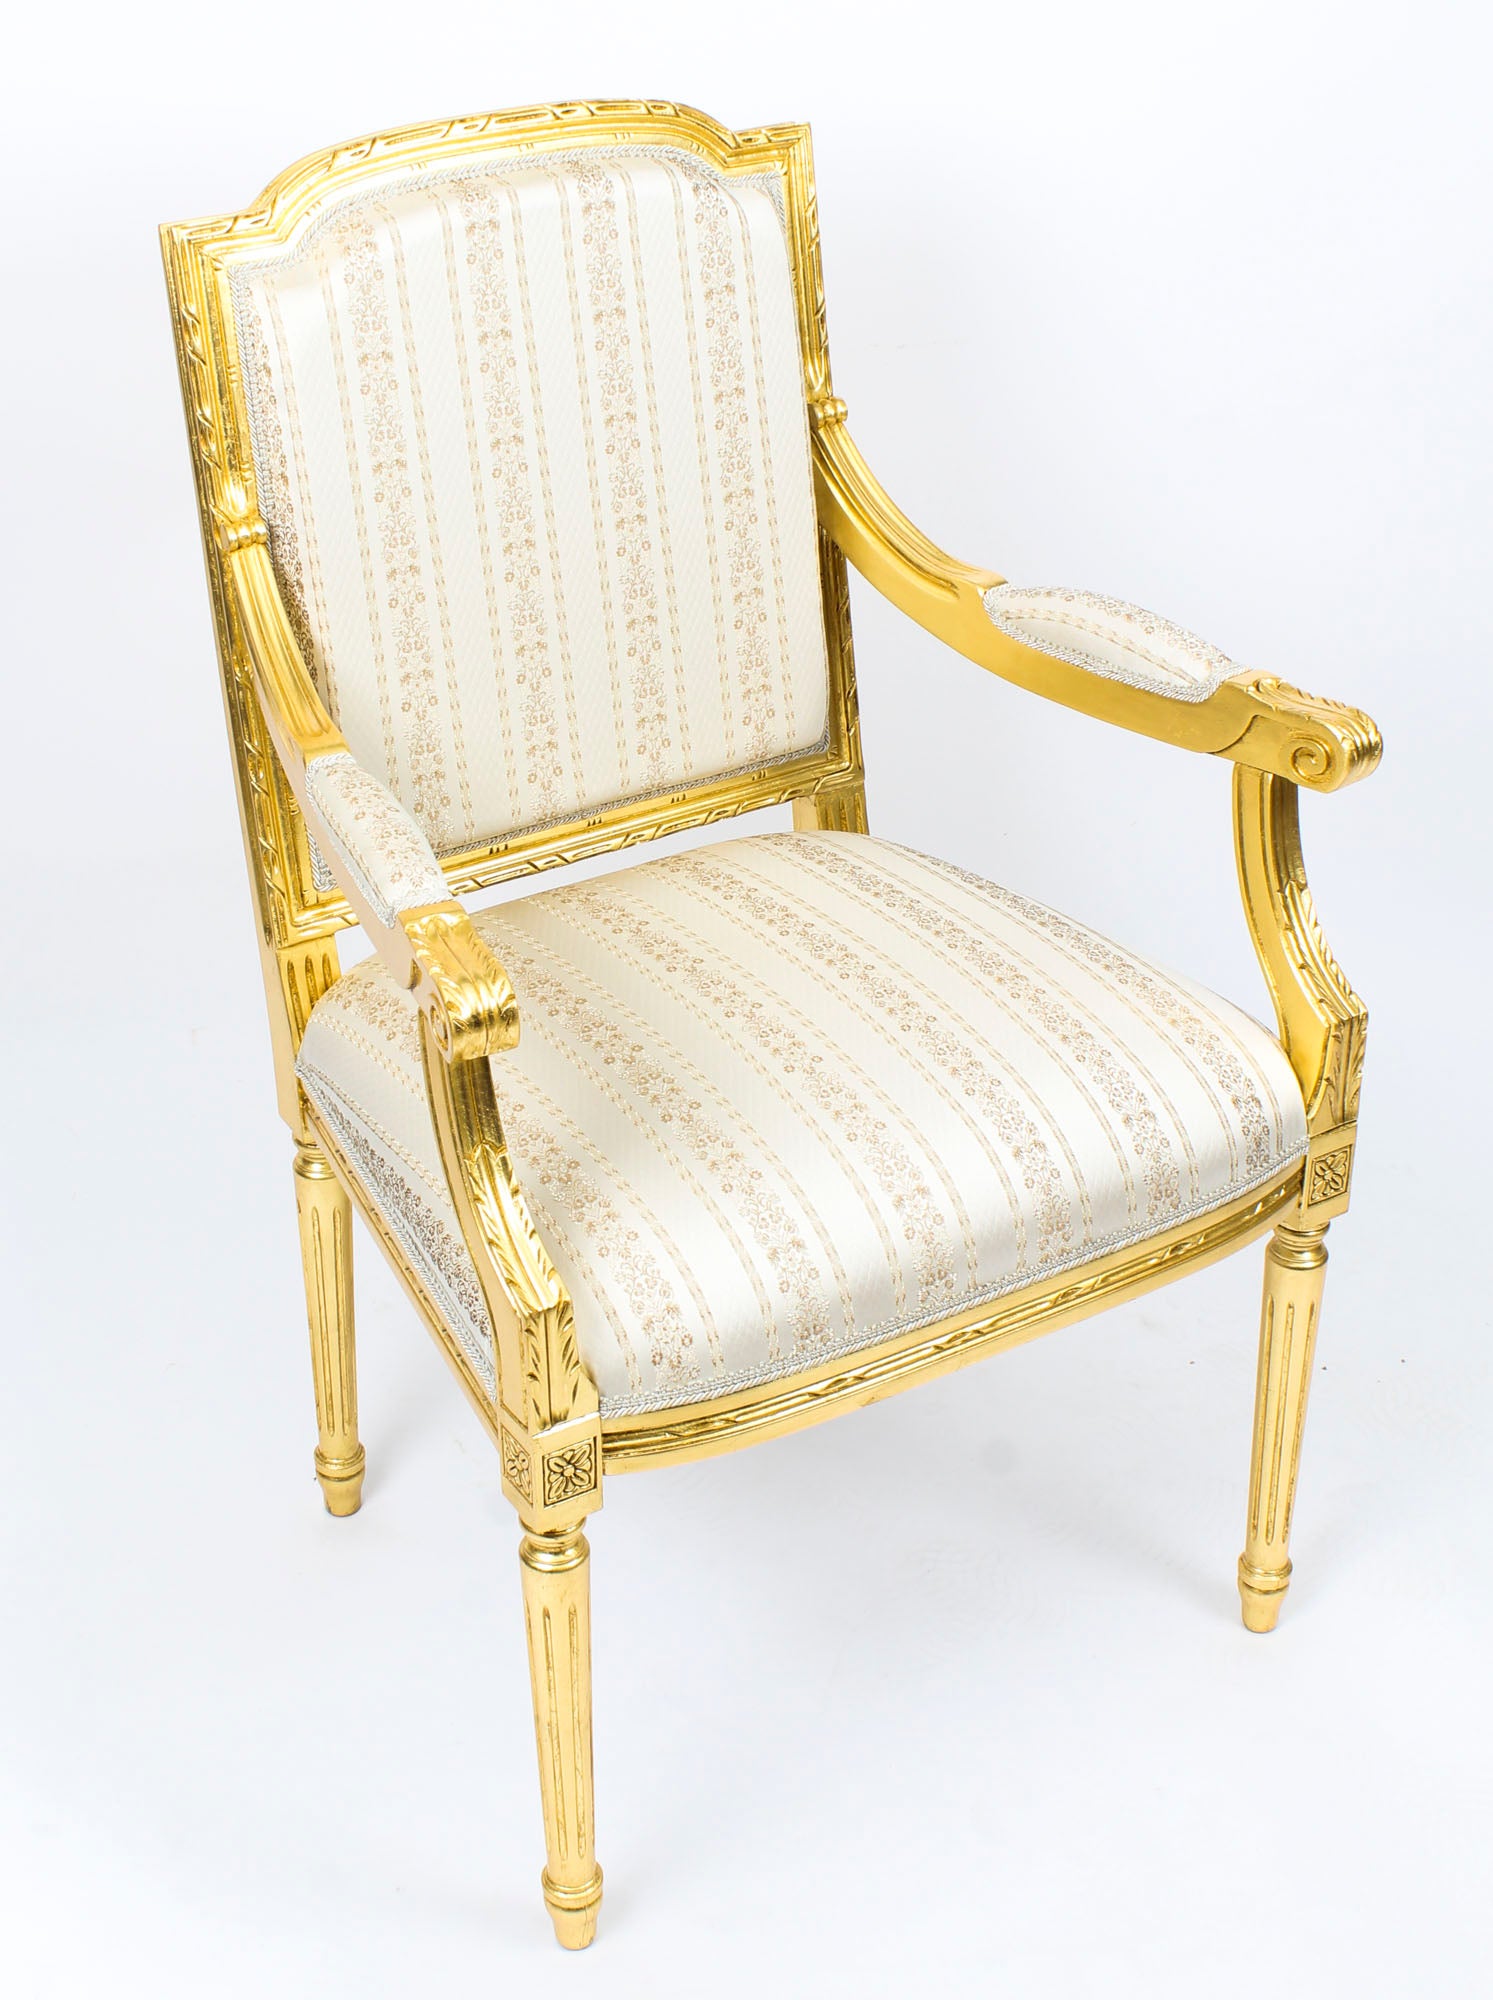 Bespoke Sets Of Giltwood Armchairs In The Louis Xv Style Im